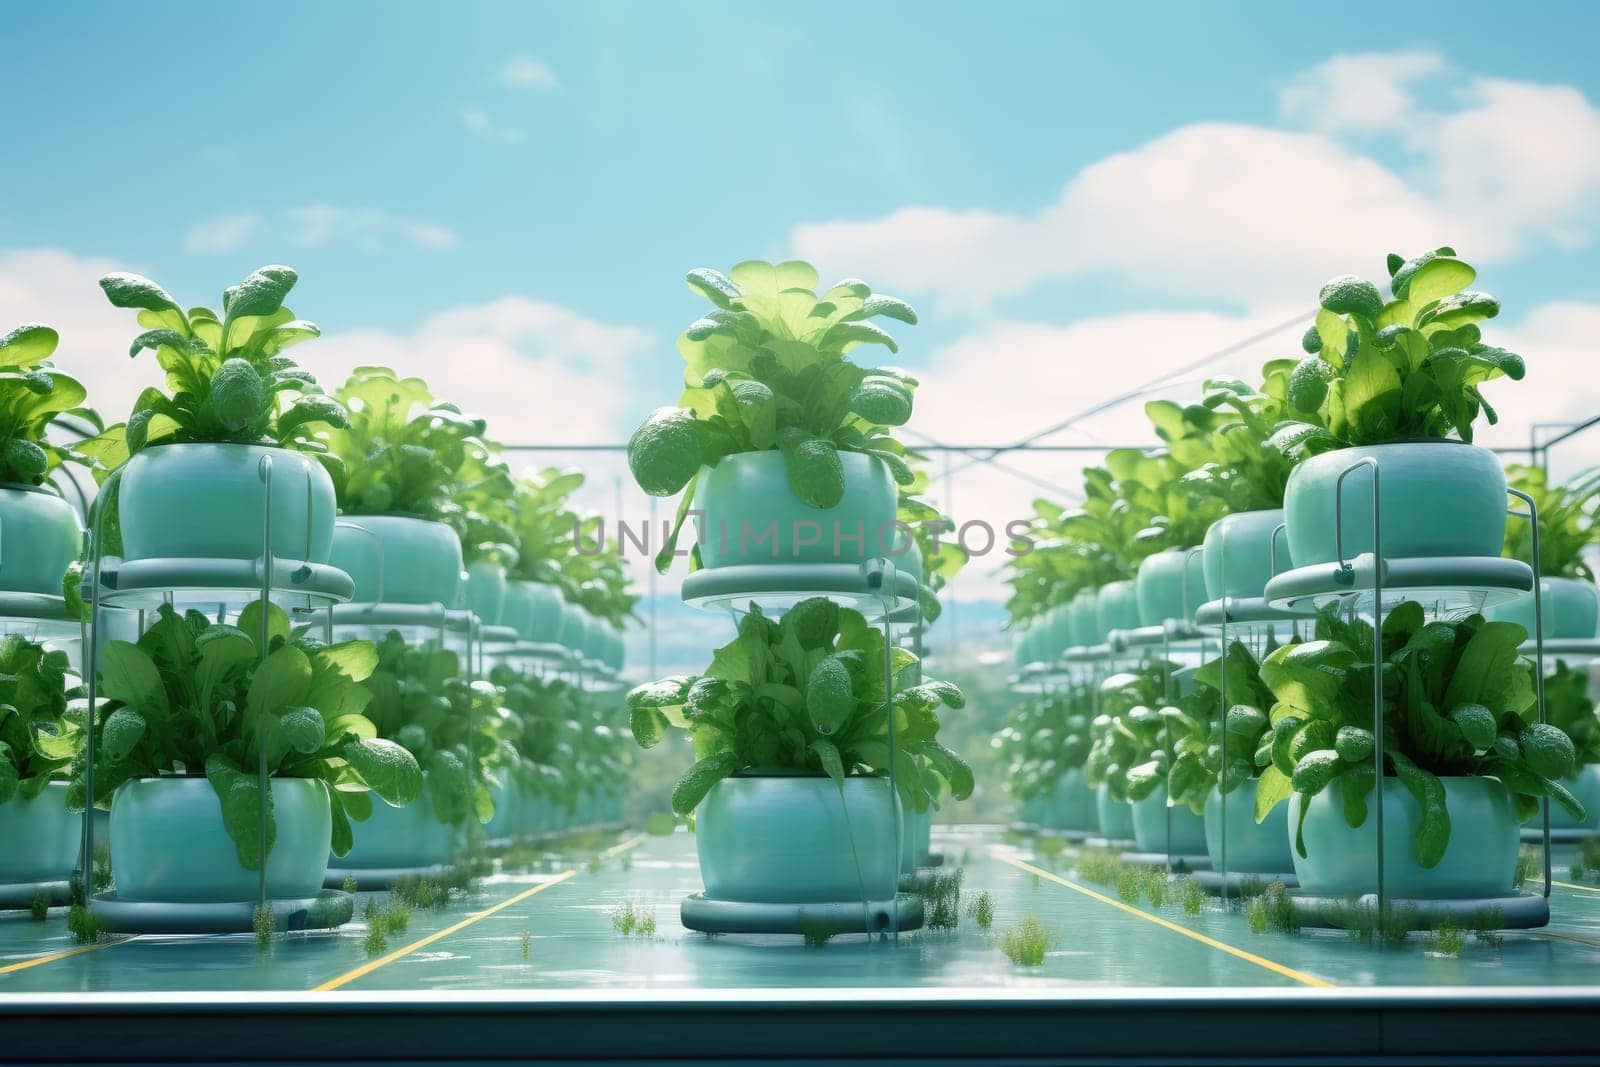 A close-up of a hydroponic garden showcasing the innovative soilless plant growth technique using nutrient solutions, providing a sustainable and efficient method of cultivation.